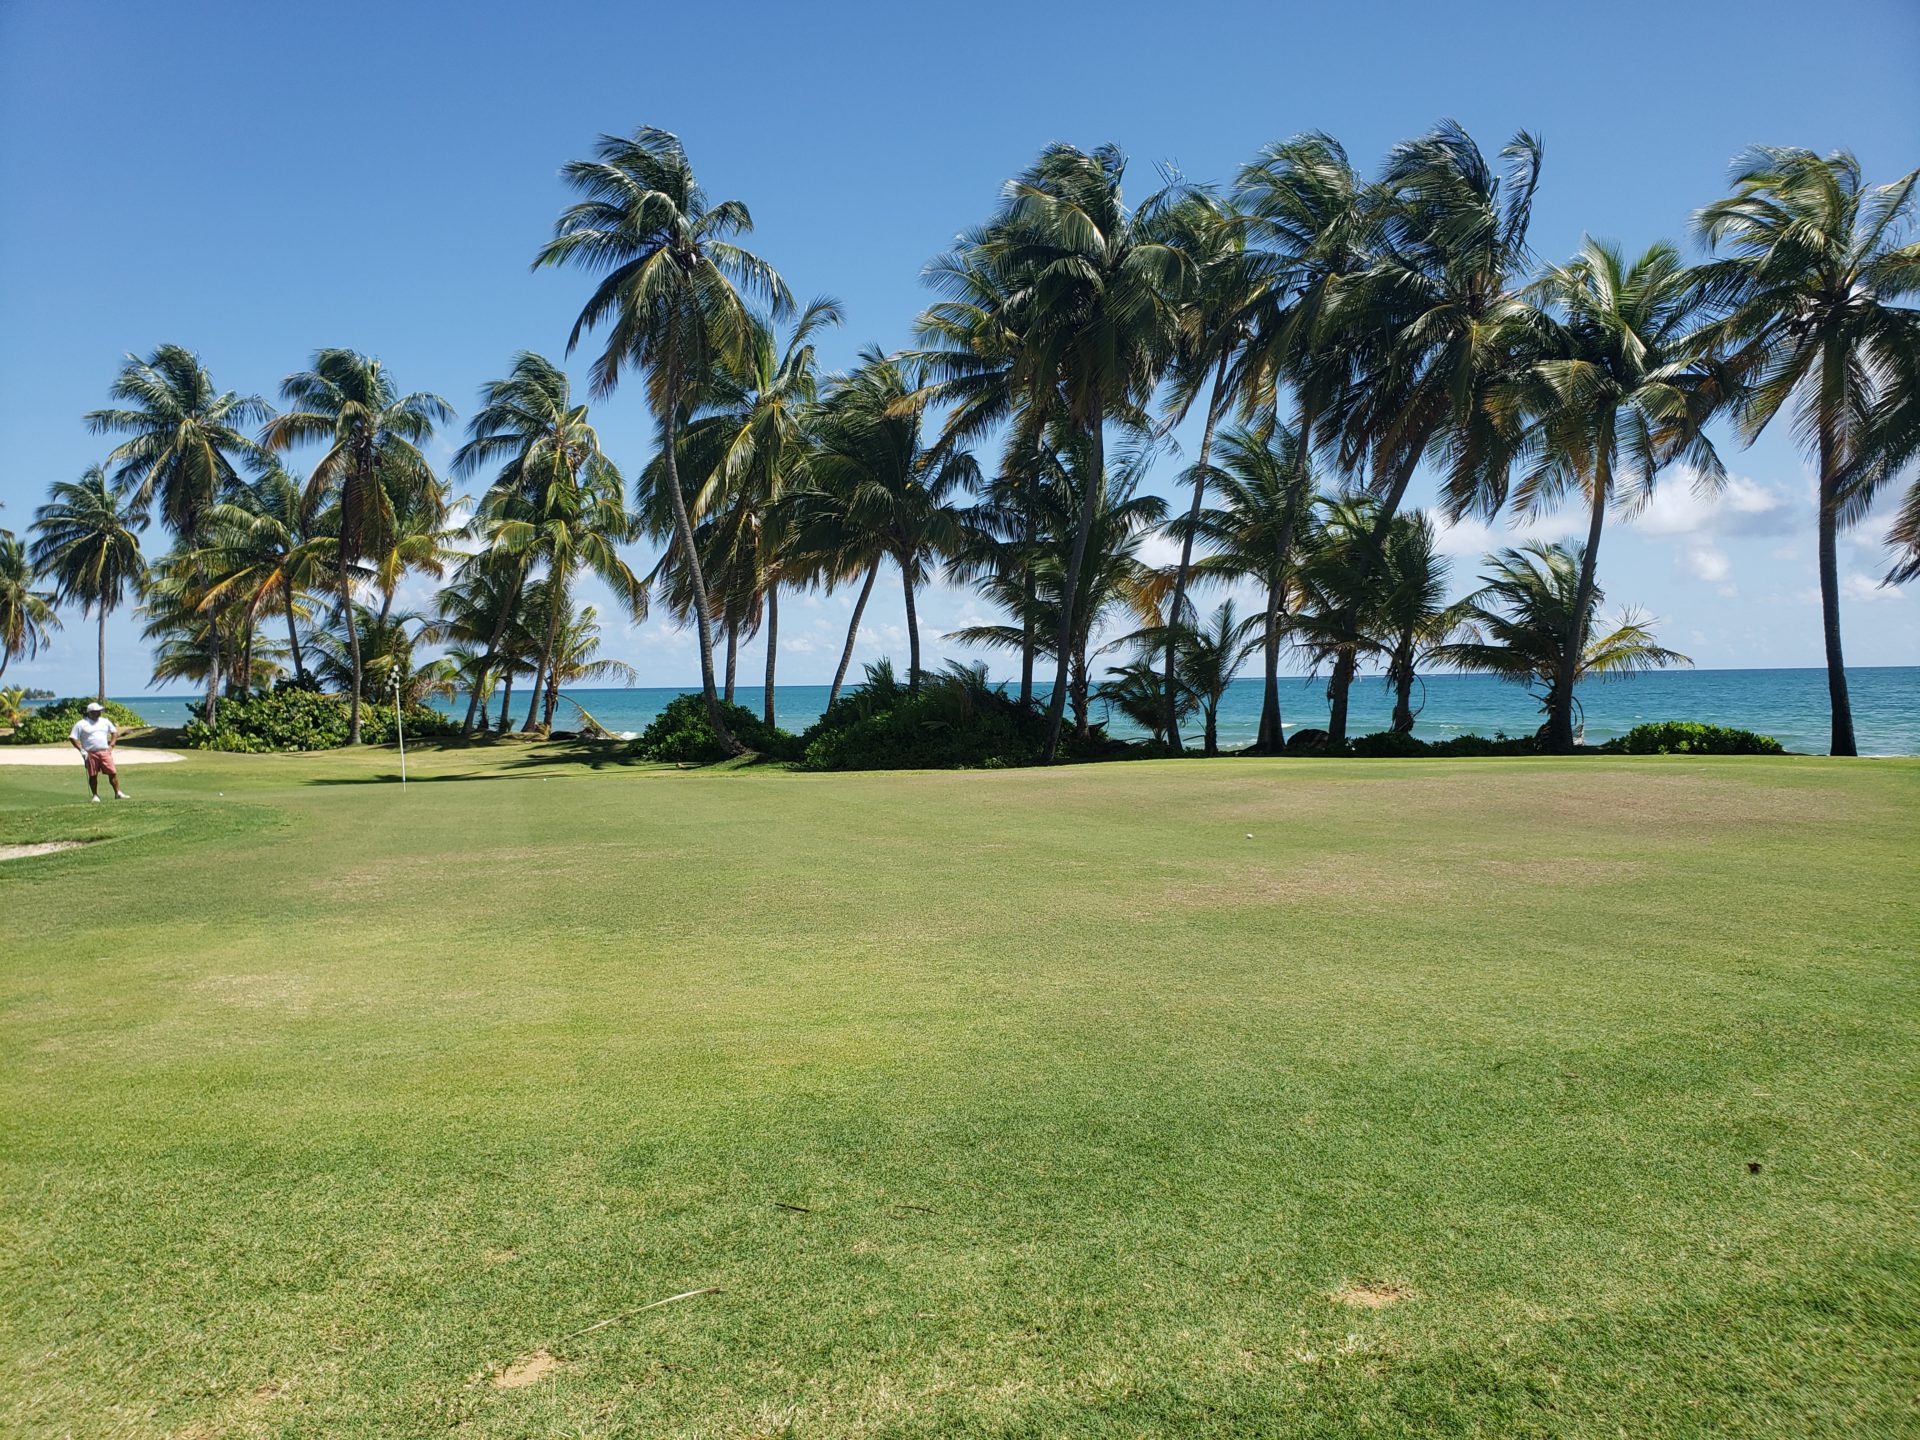 a grass field with palm trees and a body of water